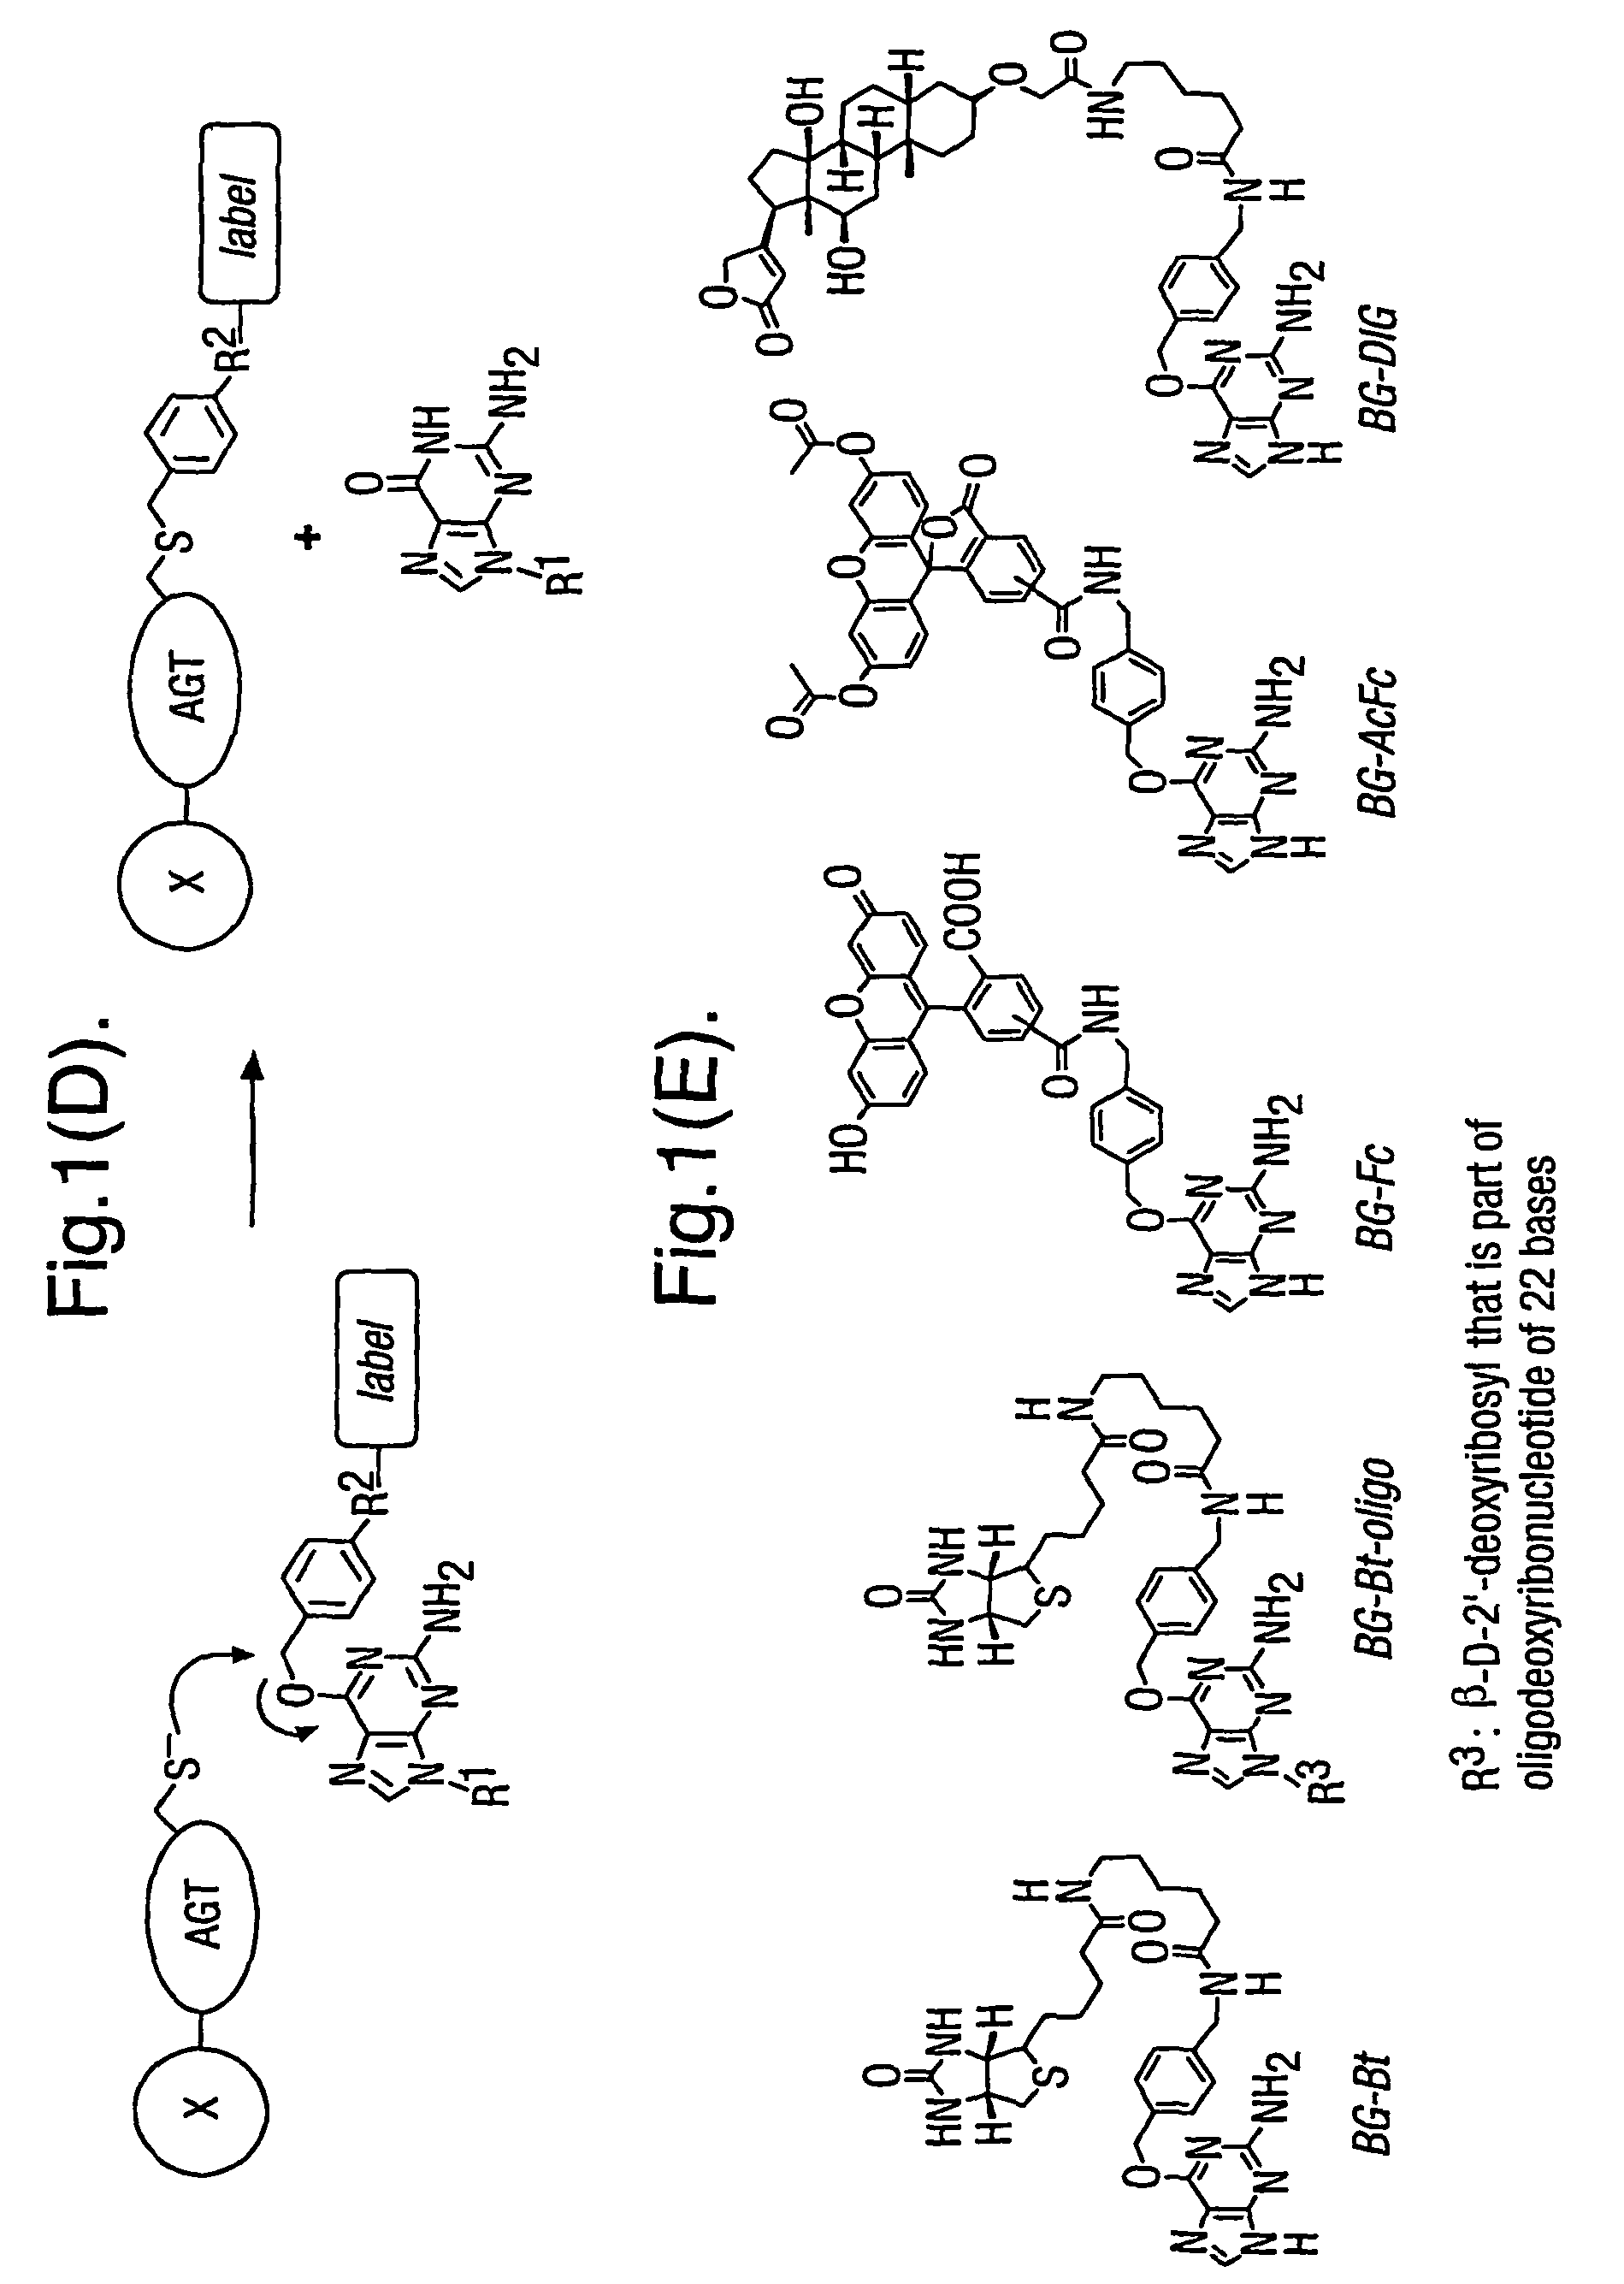 Methods using O6-alkylguanine-DNA alkyltransferases